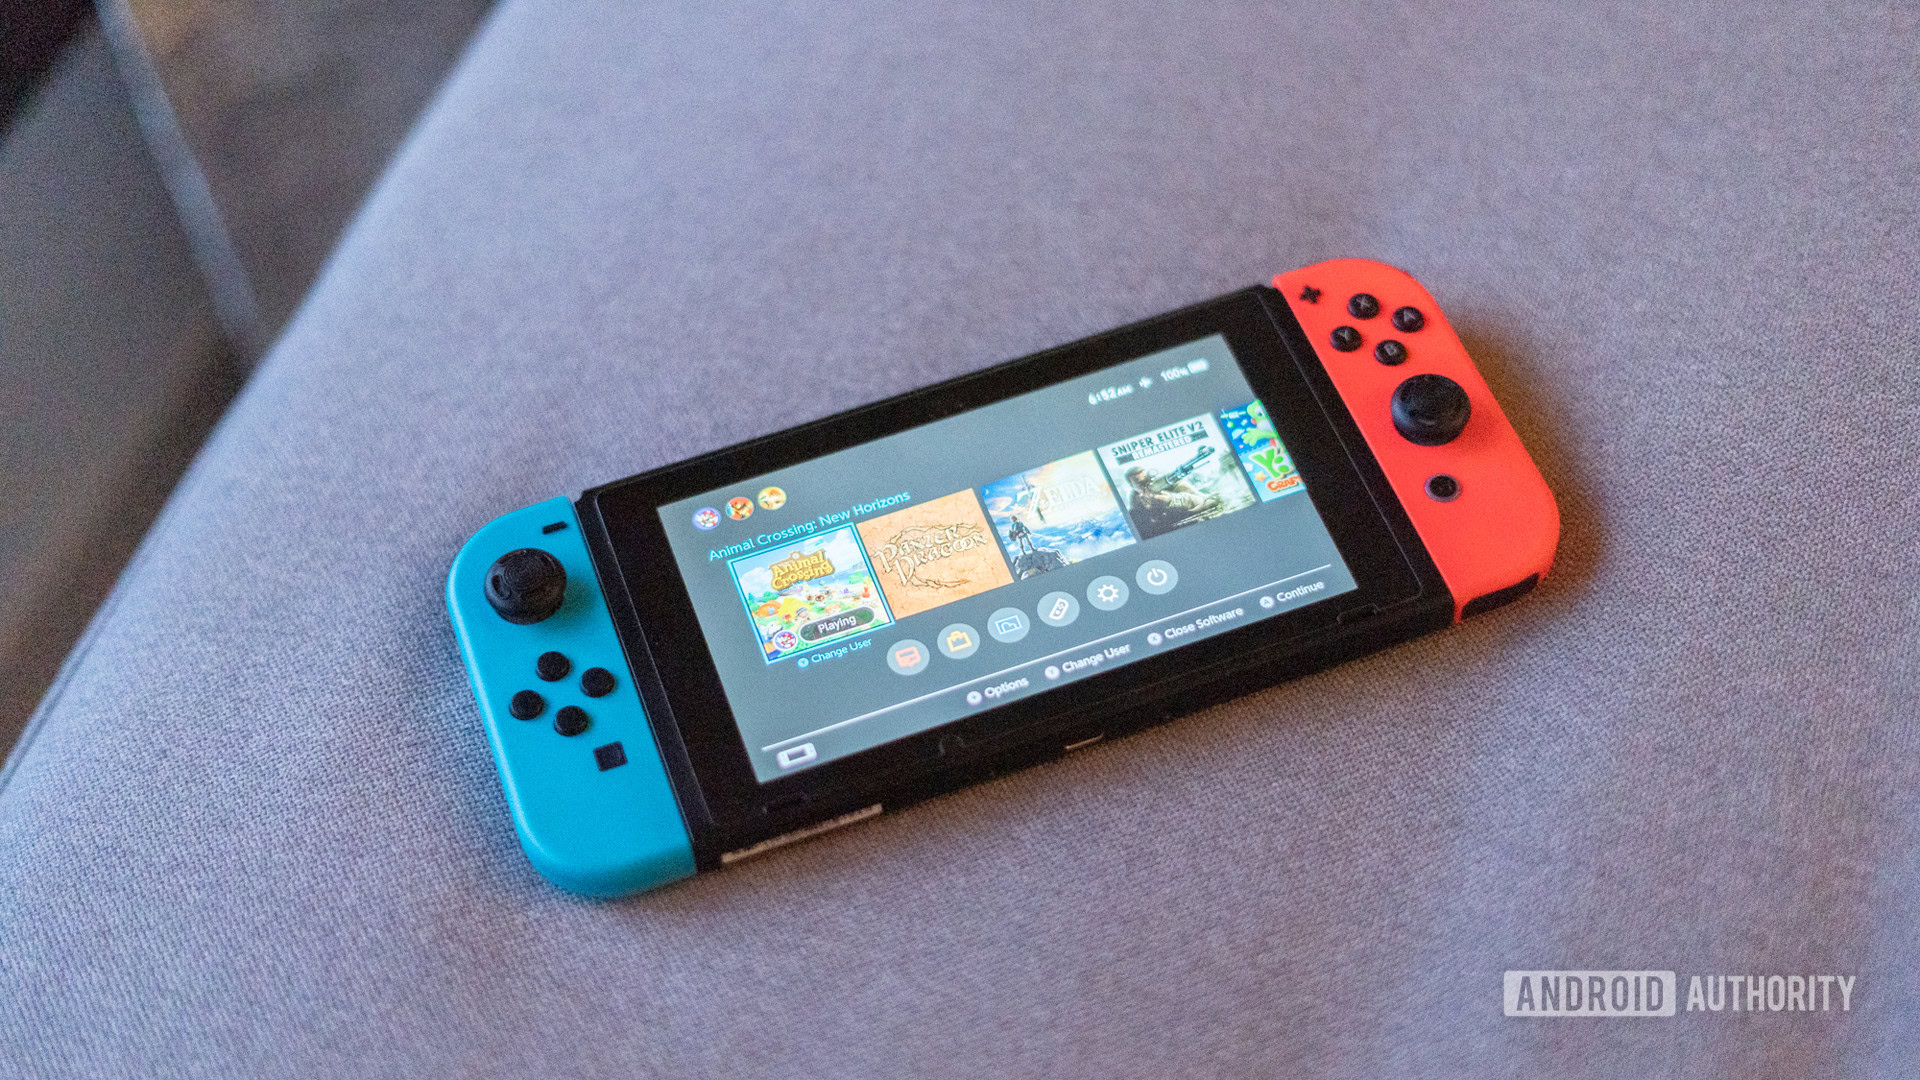 Try these games for free on Nintendo Switch!, News